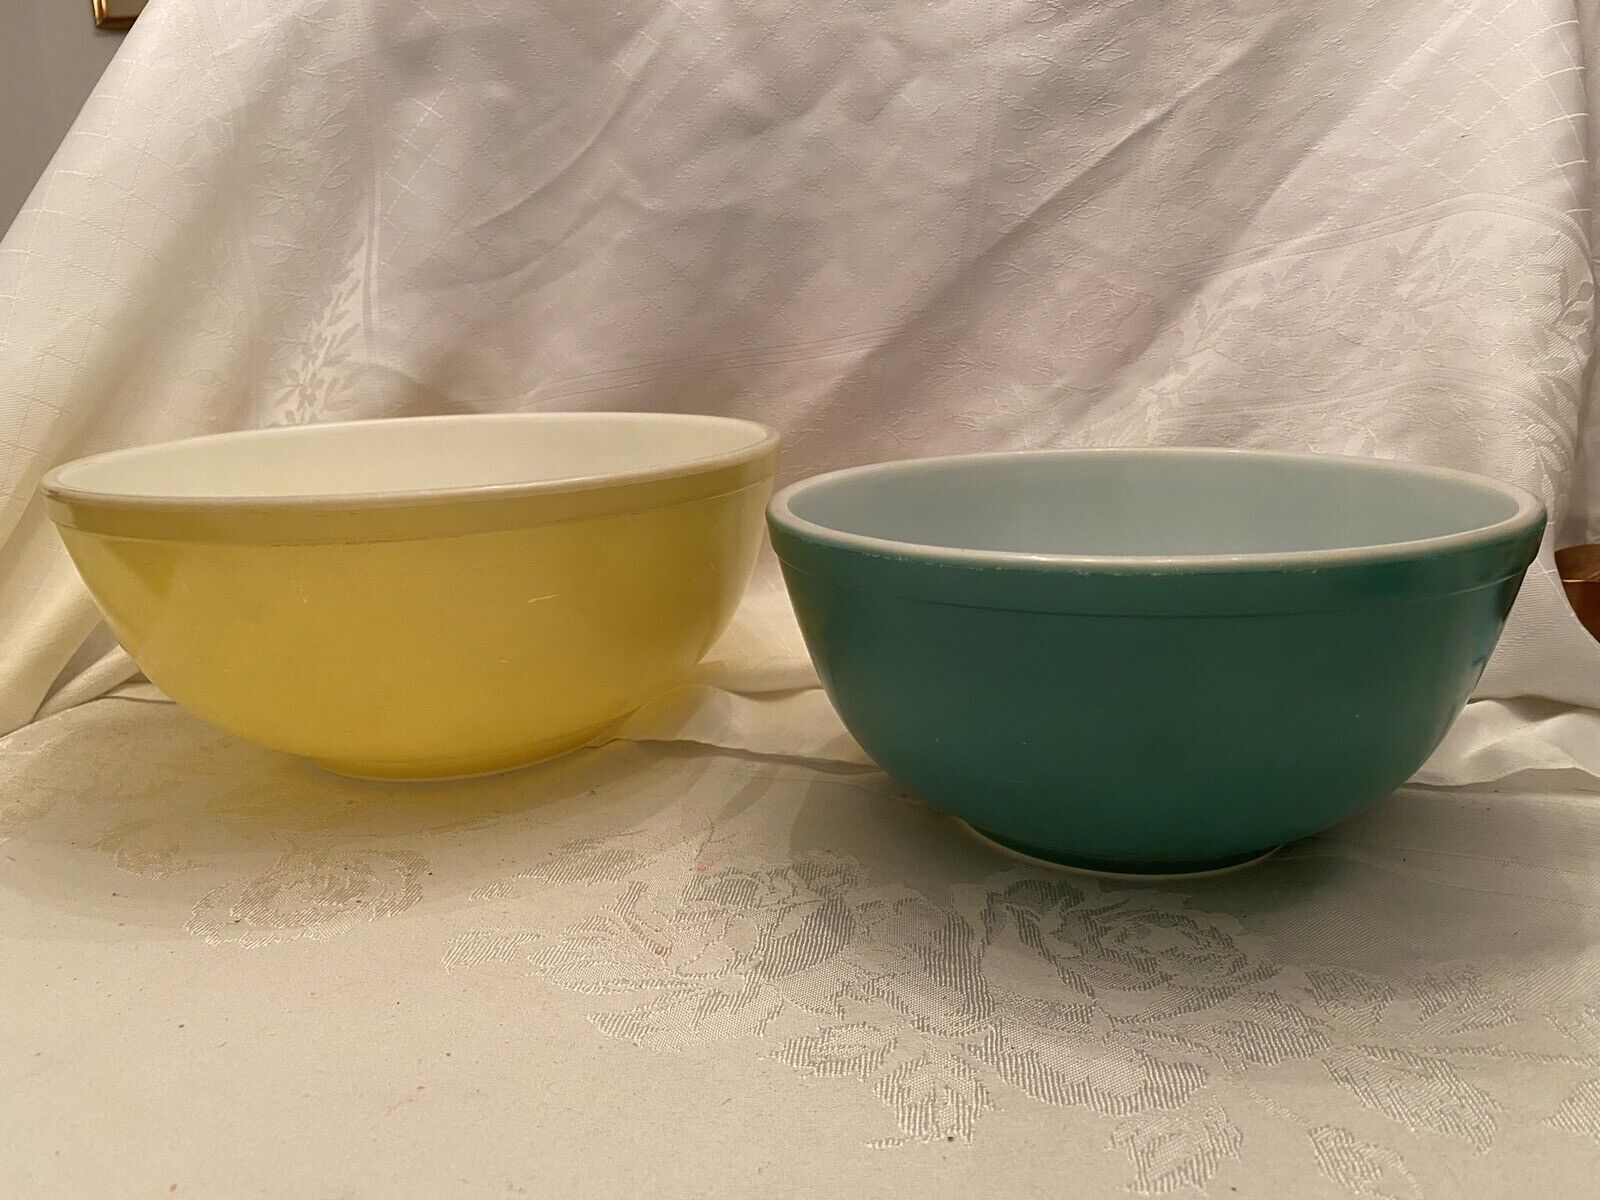 Vintage Lot of 2 PYREX Primary Colors MIXING BOWLS Large Yellow & Medium Green